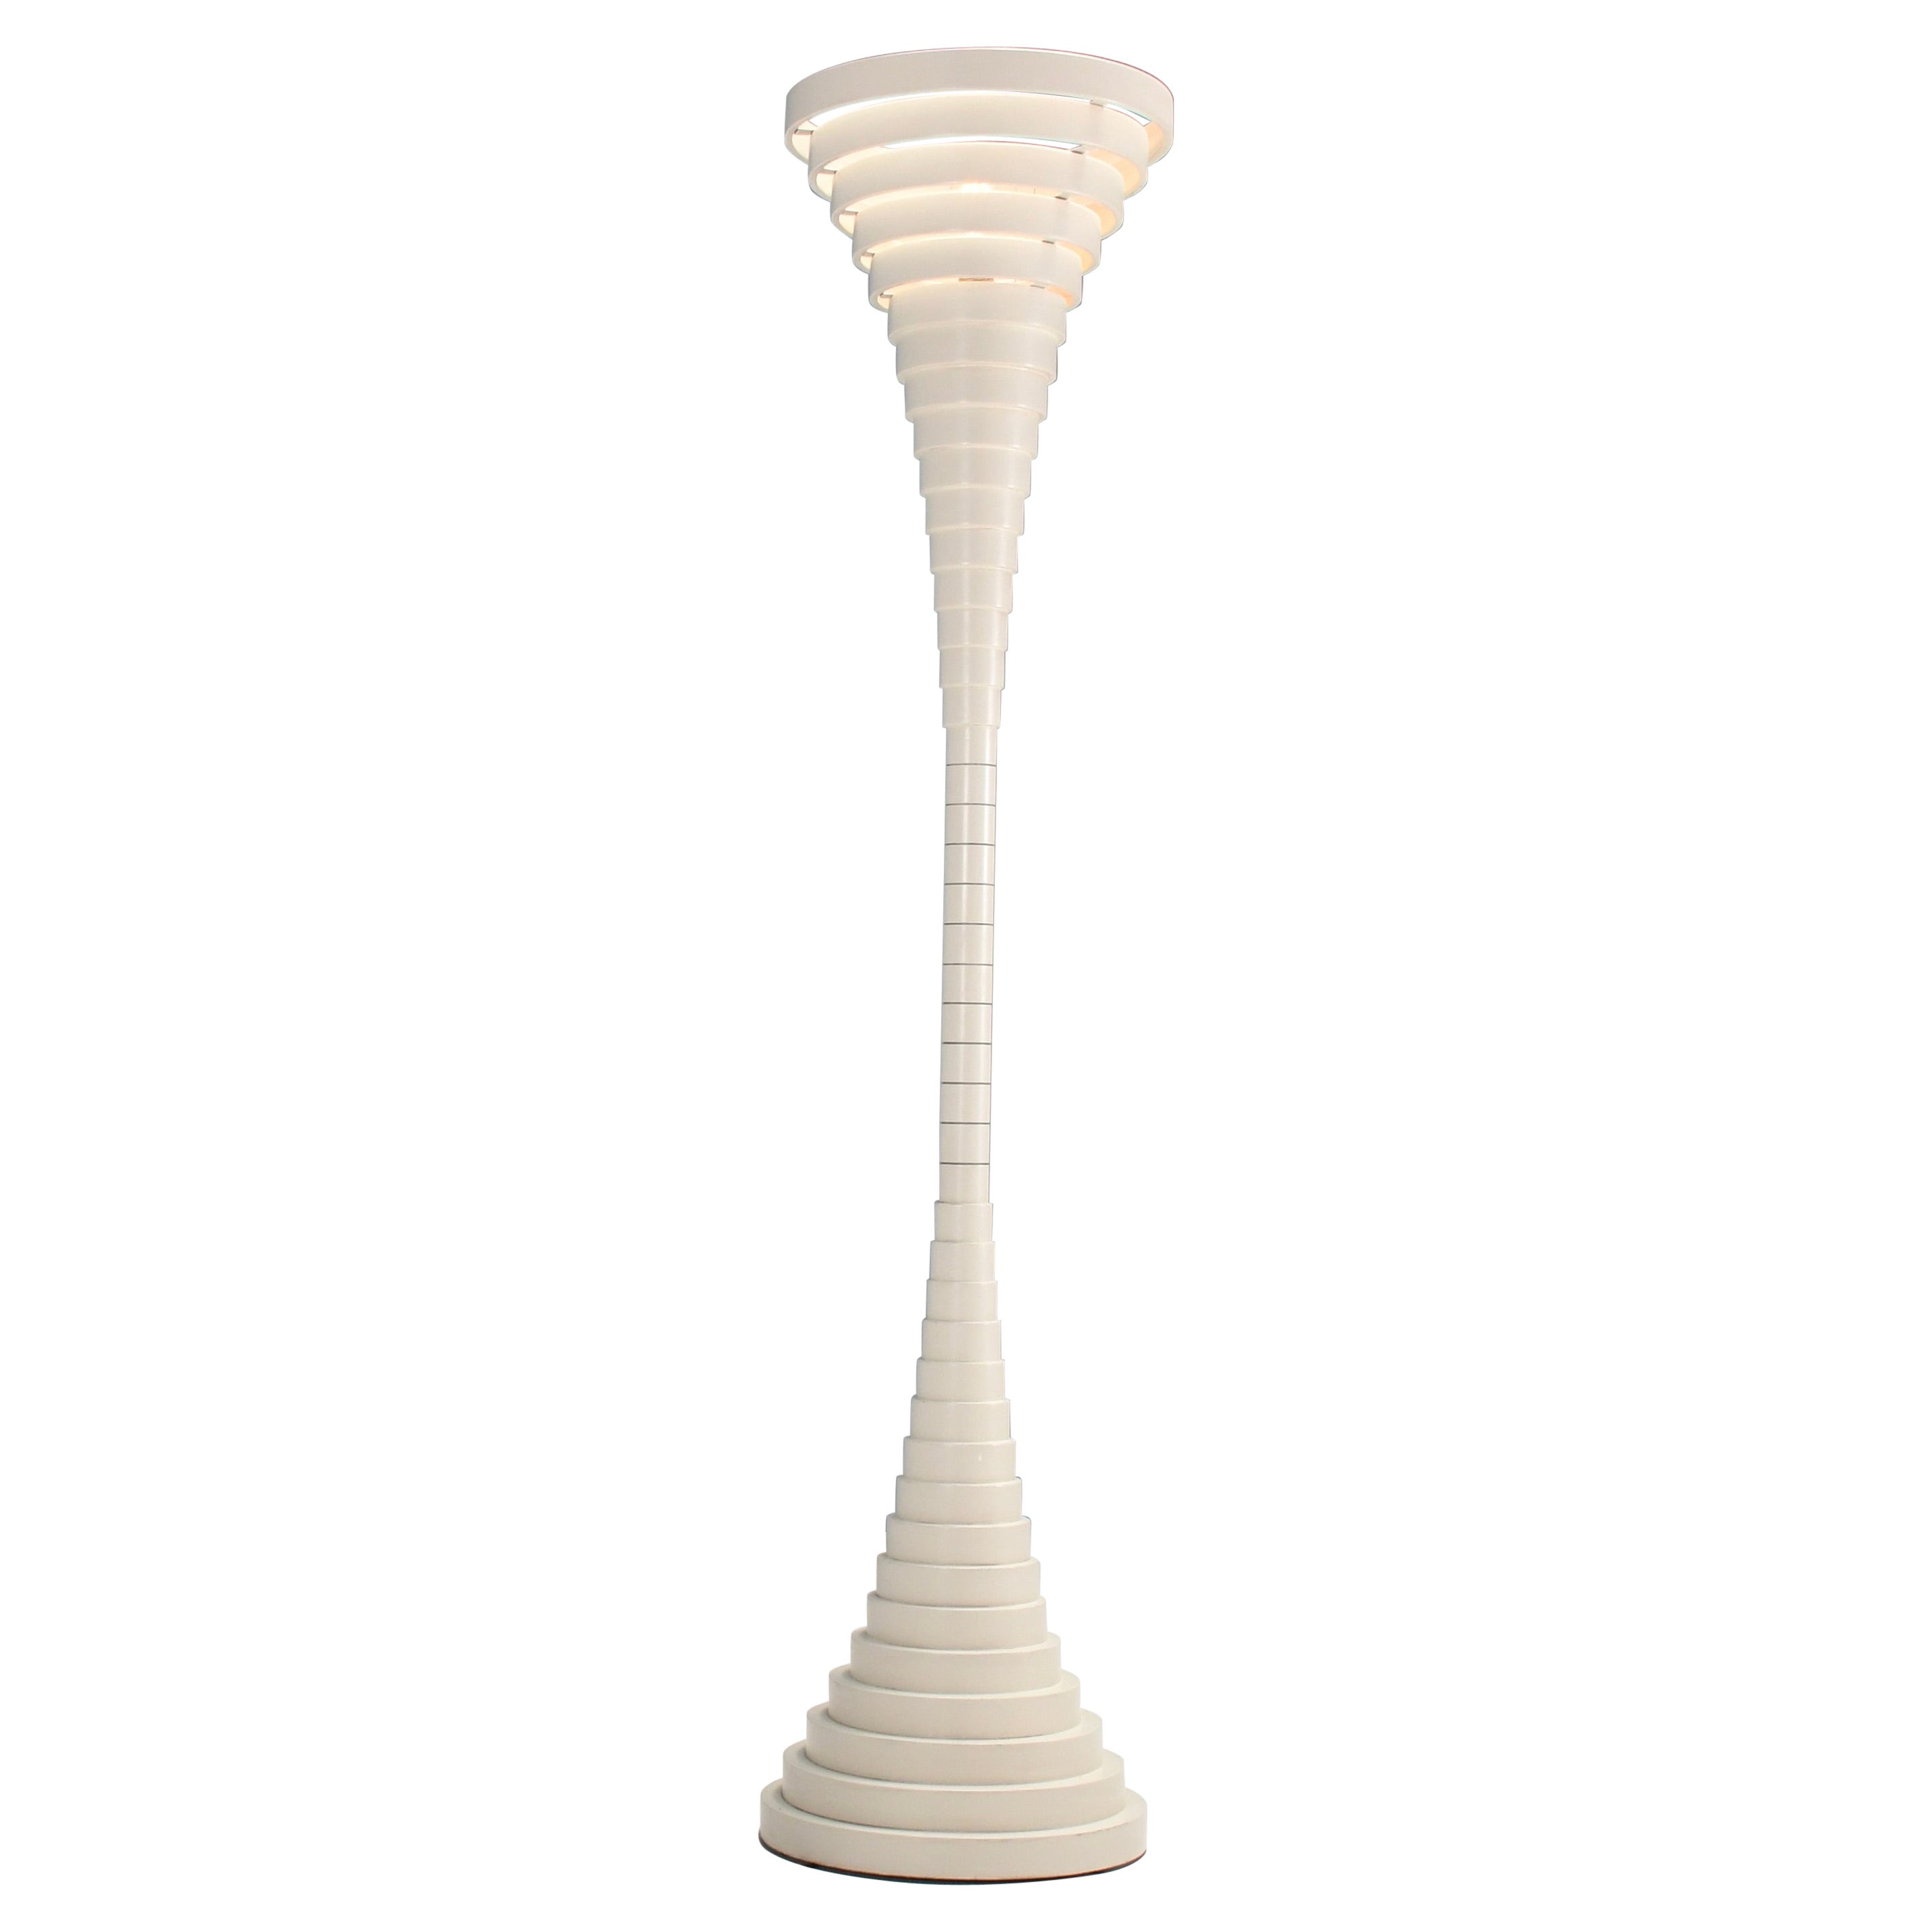  ‘Helga’ Floor Lamp by Silvio Bilangione and Paolo Portoghesi for Fumagalli For Sale